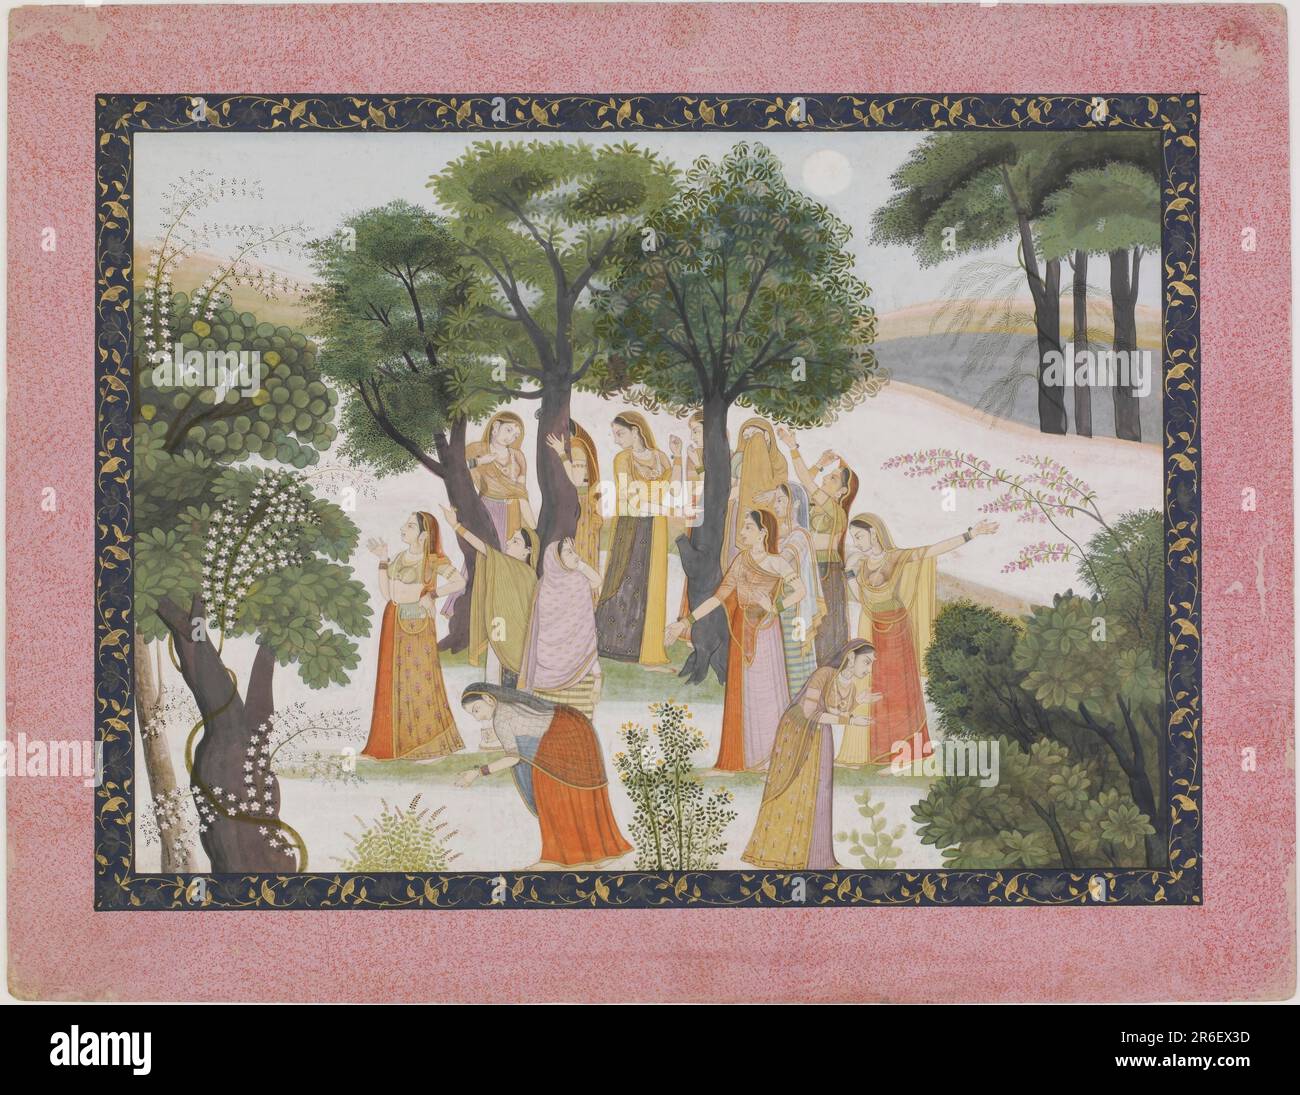 The Gopis Search for Krishna from a Bhagavata Purana. Date: ca. 1780. Opaque watercolor and gold on paper. Origin: Punjab Hills, India. Museum: Freer Gallery of Art and Arthur M. Sackler Gallery. Stock Photo